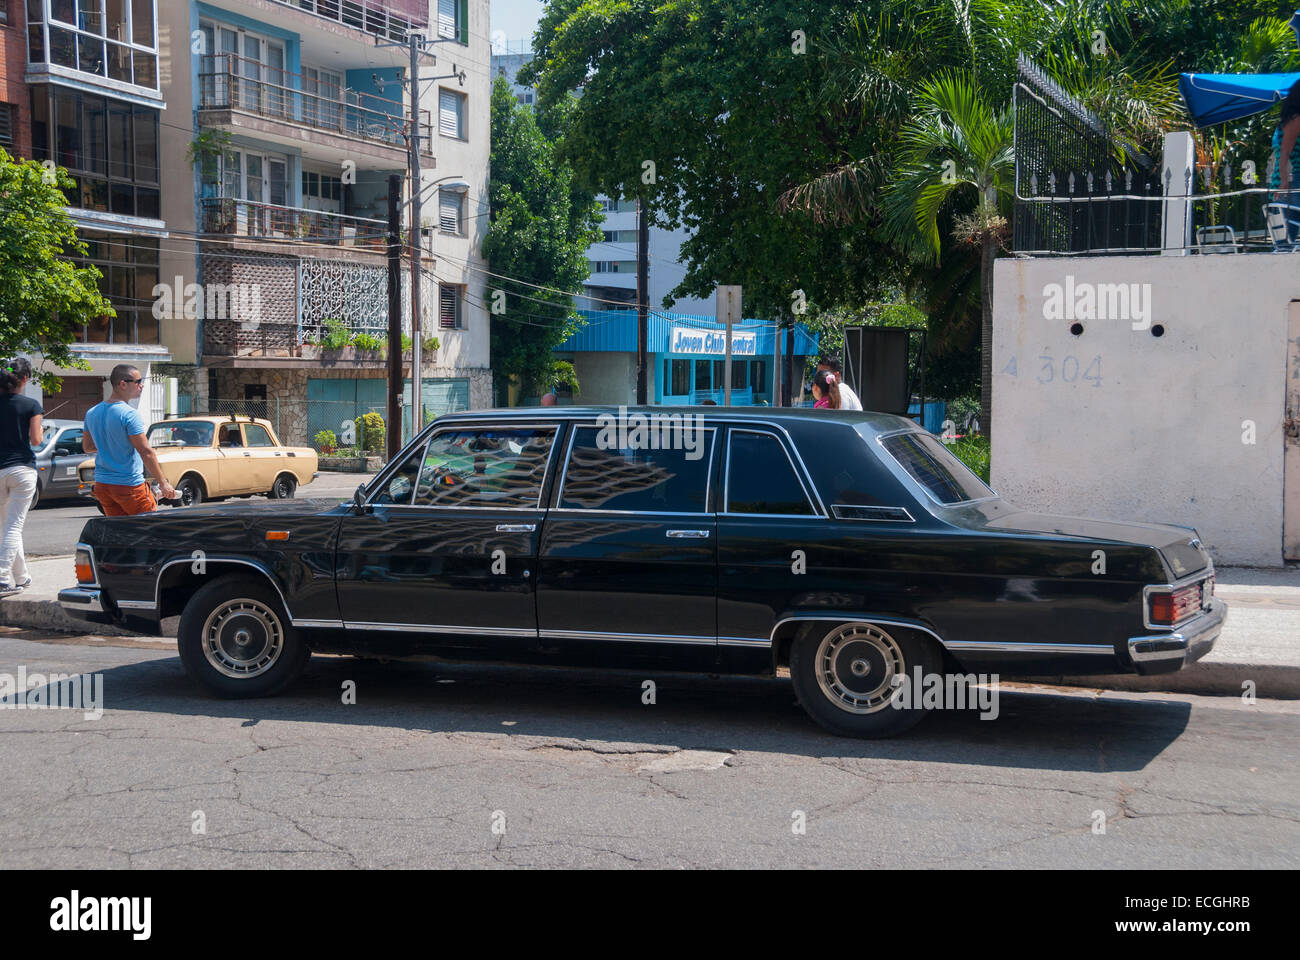 A soviet era Gaz-14 Chaika limousine rumoured to have been a gift to Castro from Khrushchev is now used as a Cuban tourist taxi. Stock Photo